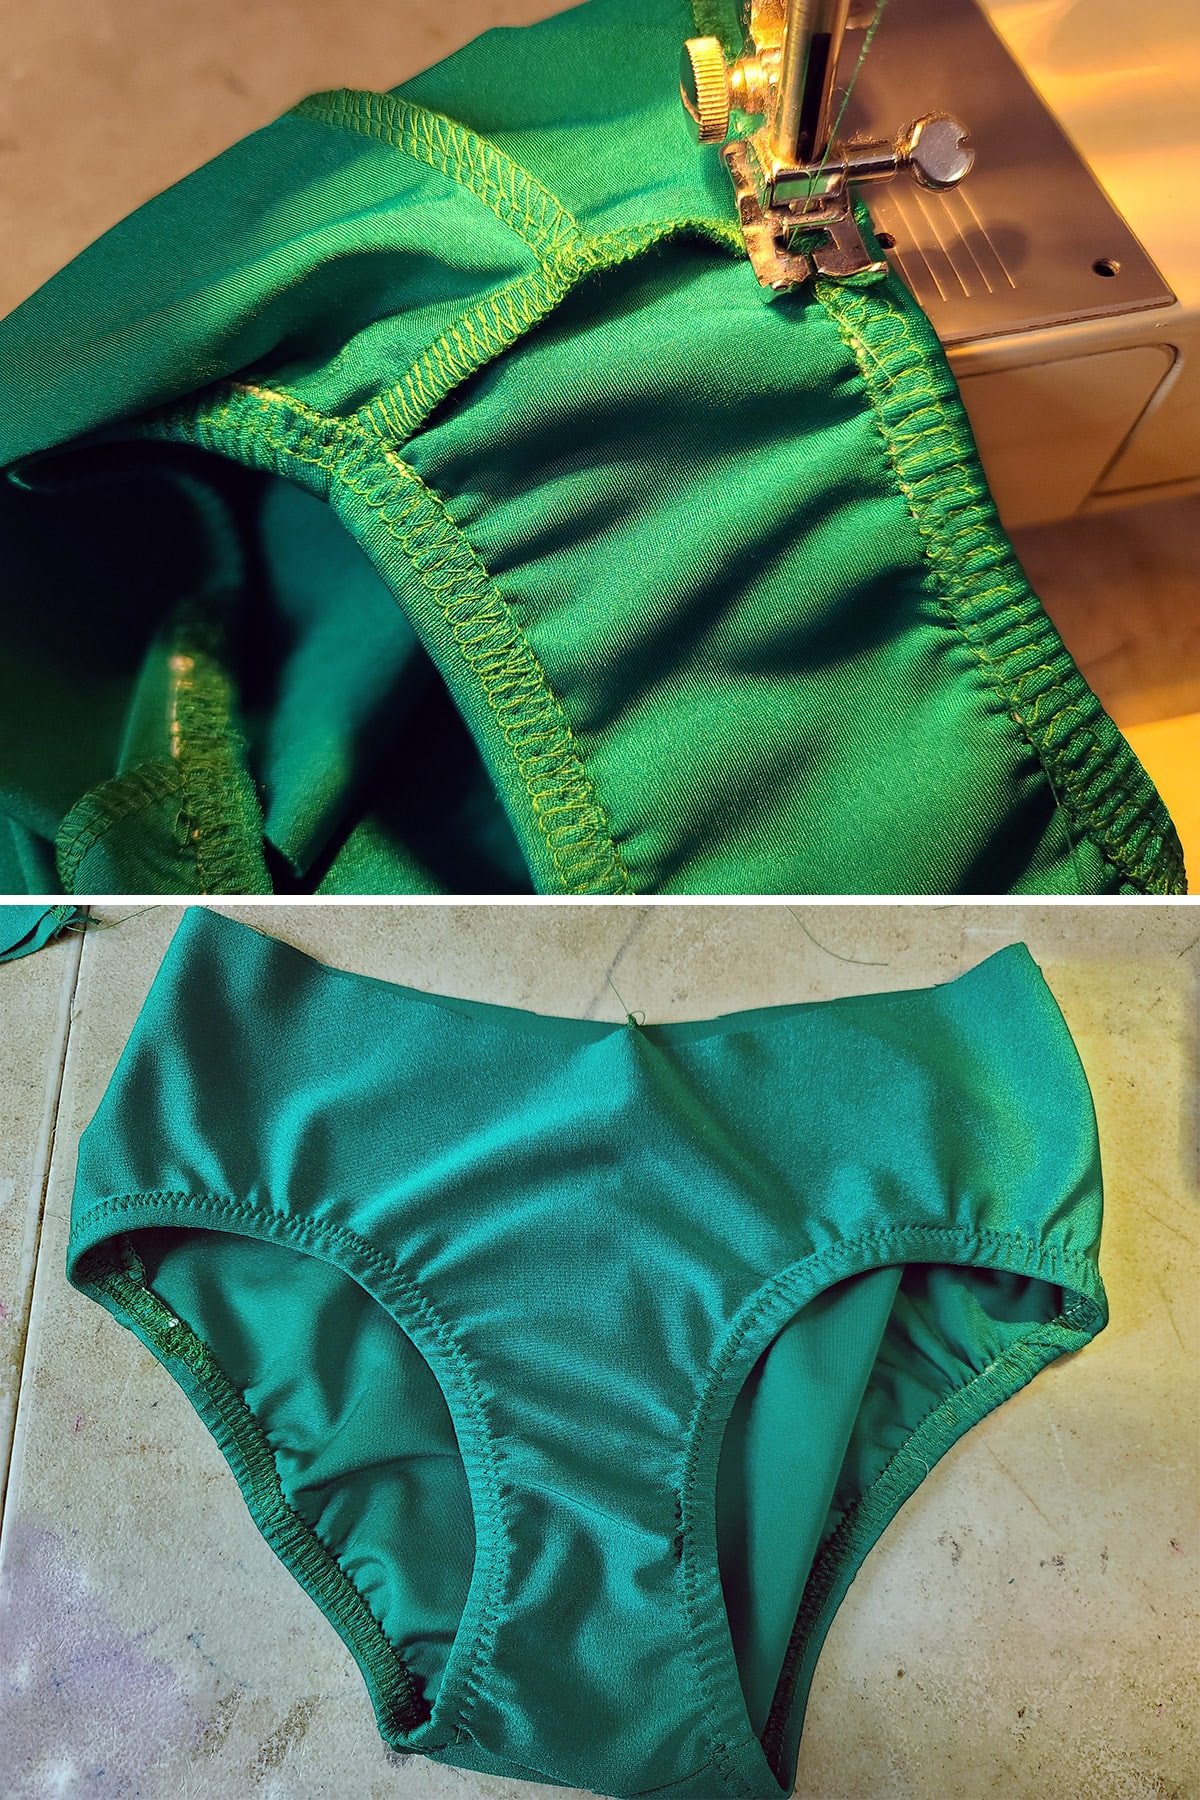 A 2 part image showing the elastic leg holes of a green swimsuit being flipped and top stitched.